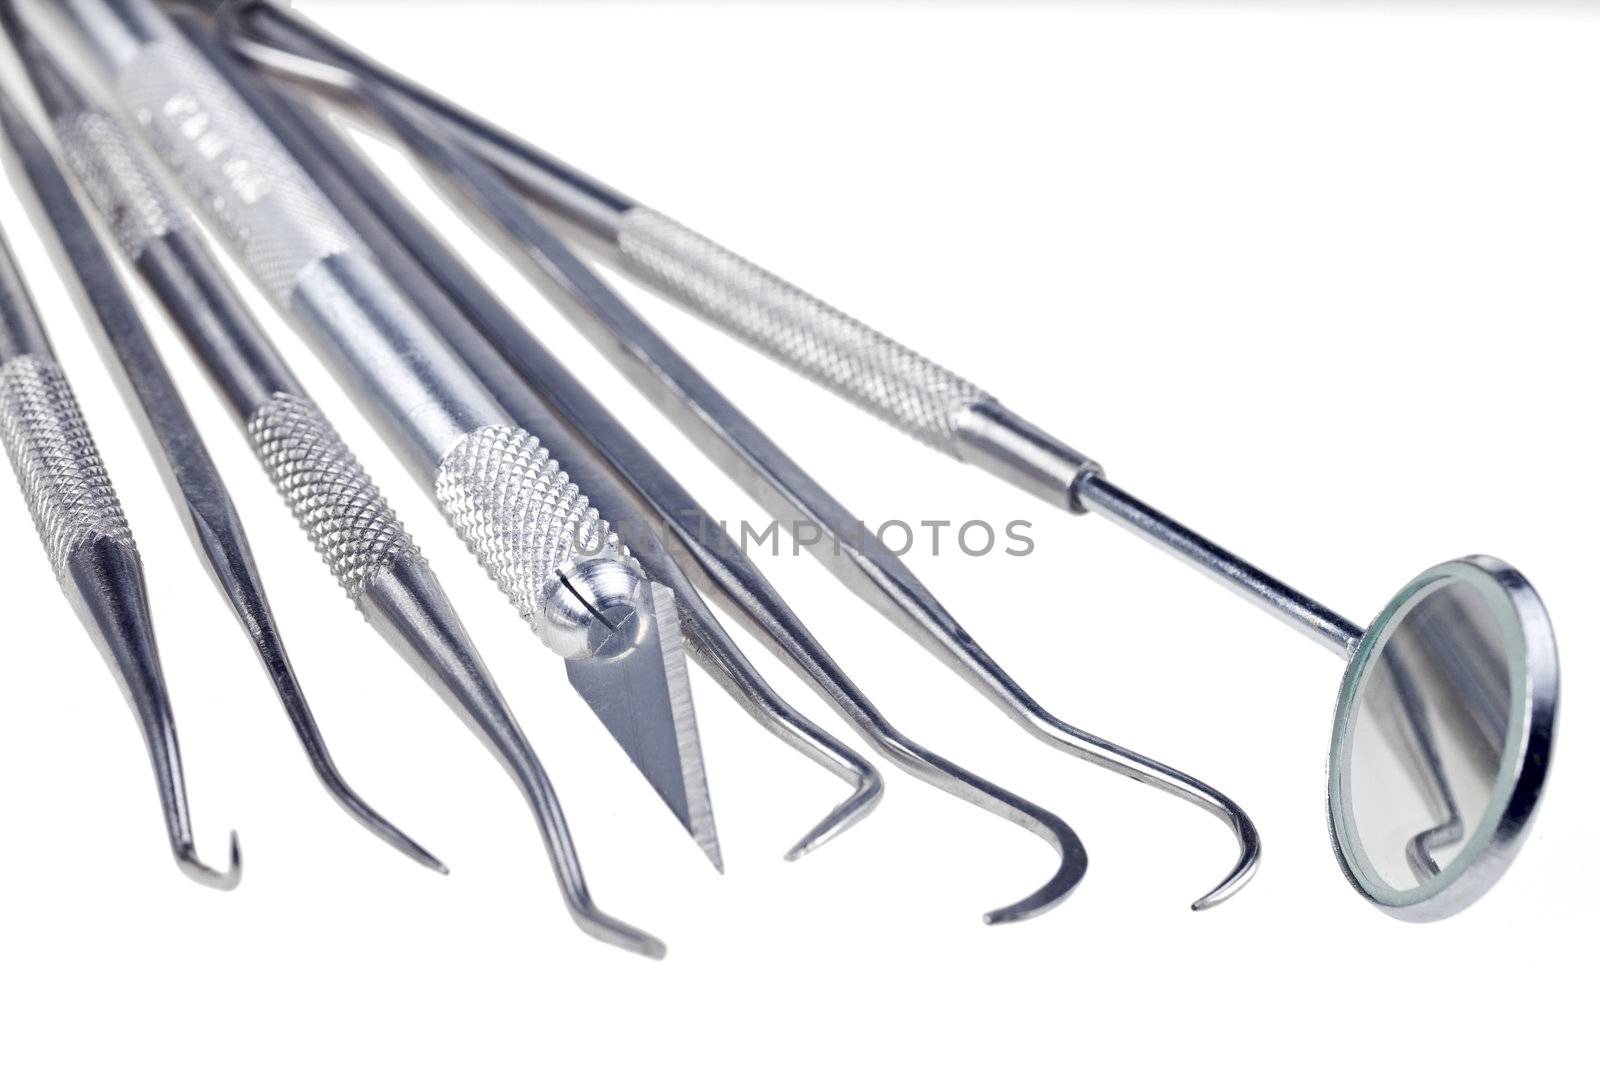 dentists tools isolated on a white background by bernjuer